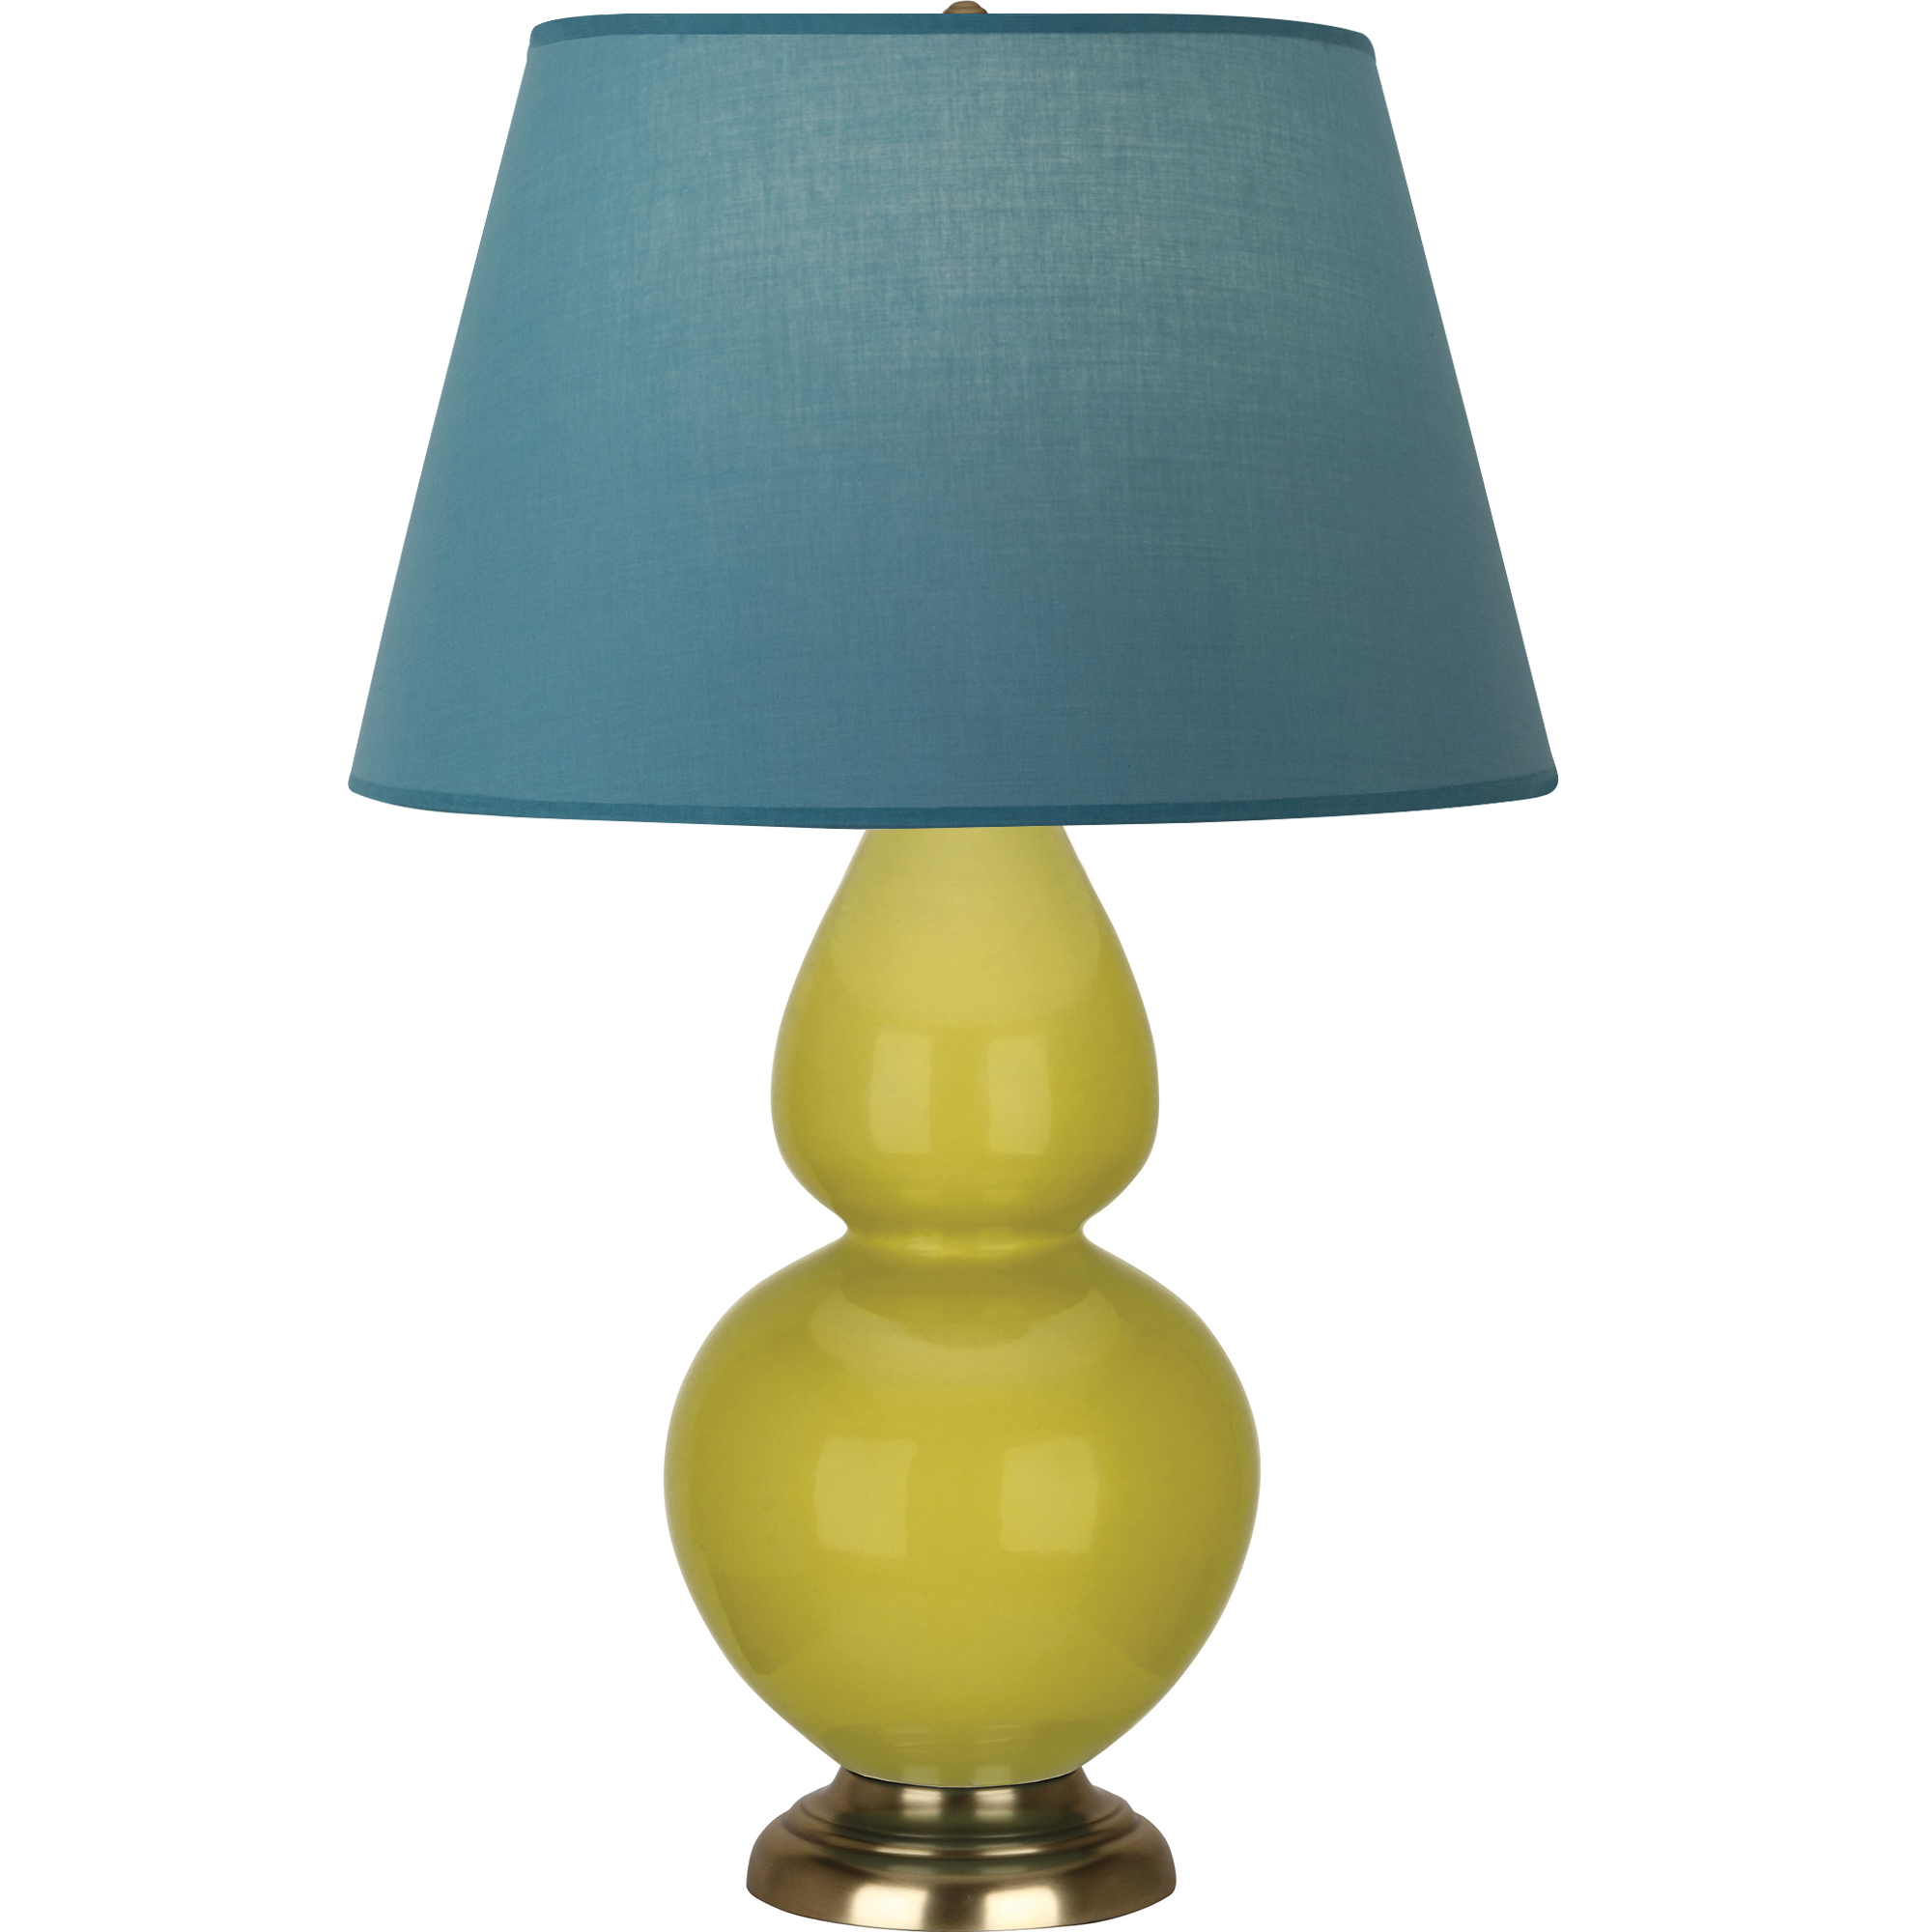 Double Gourd Table Lamp Style #CI20B